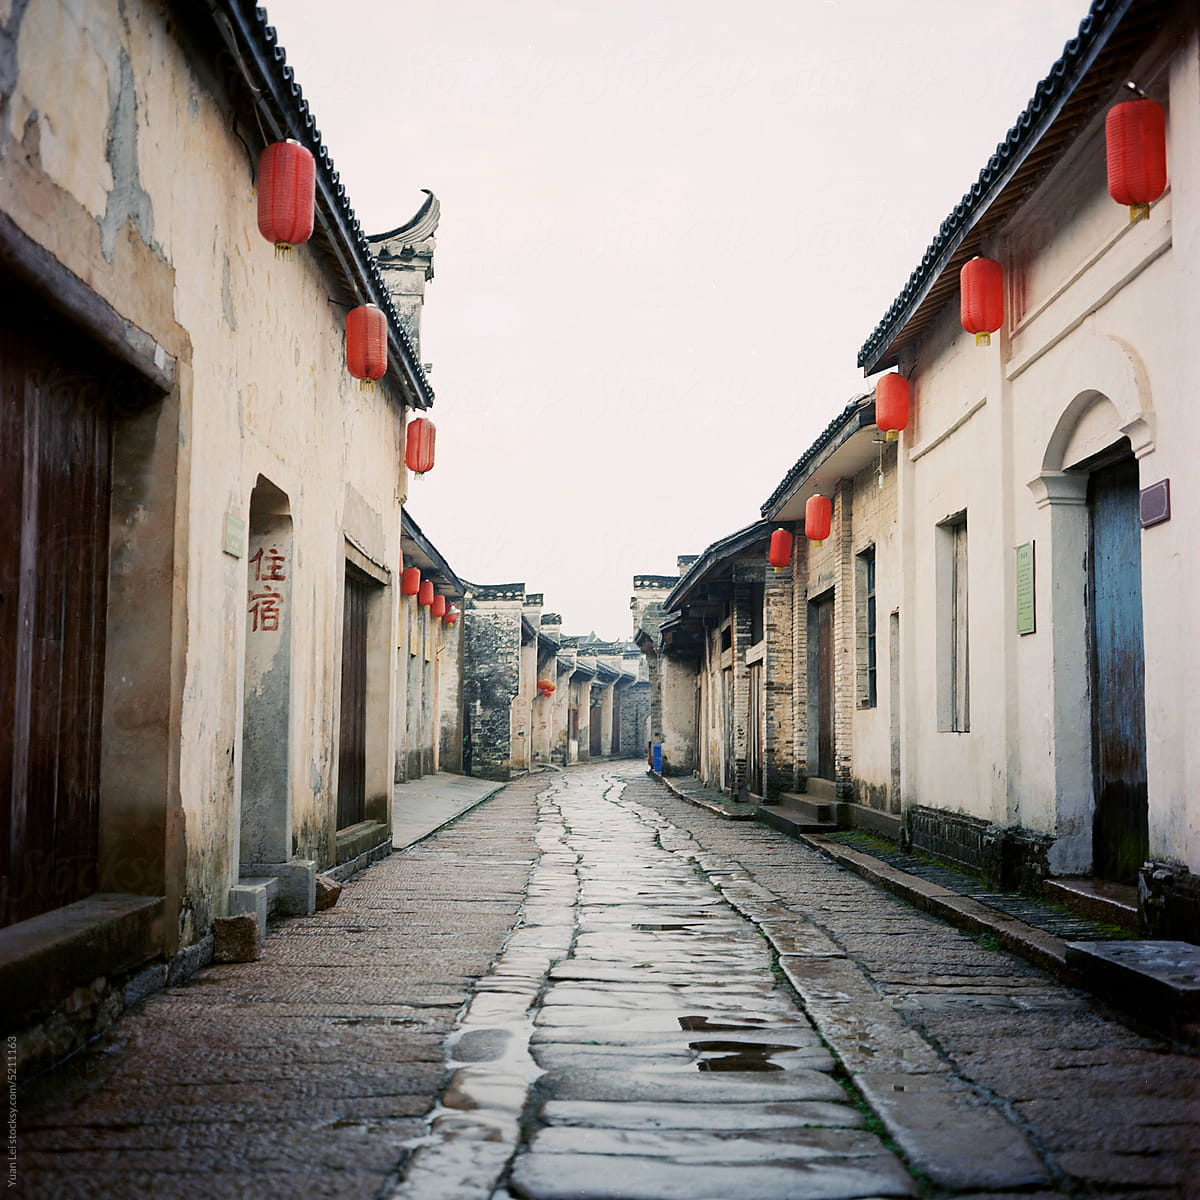 Old alley with red lanterns